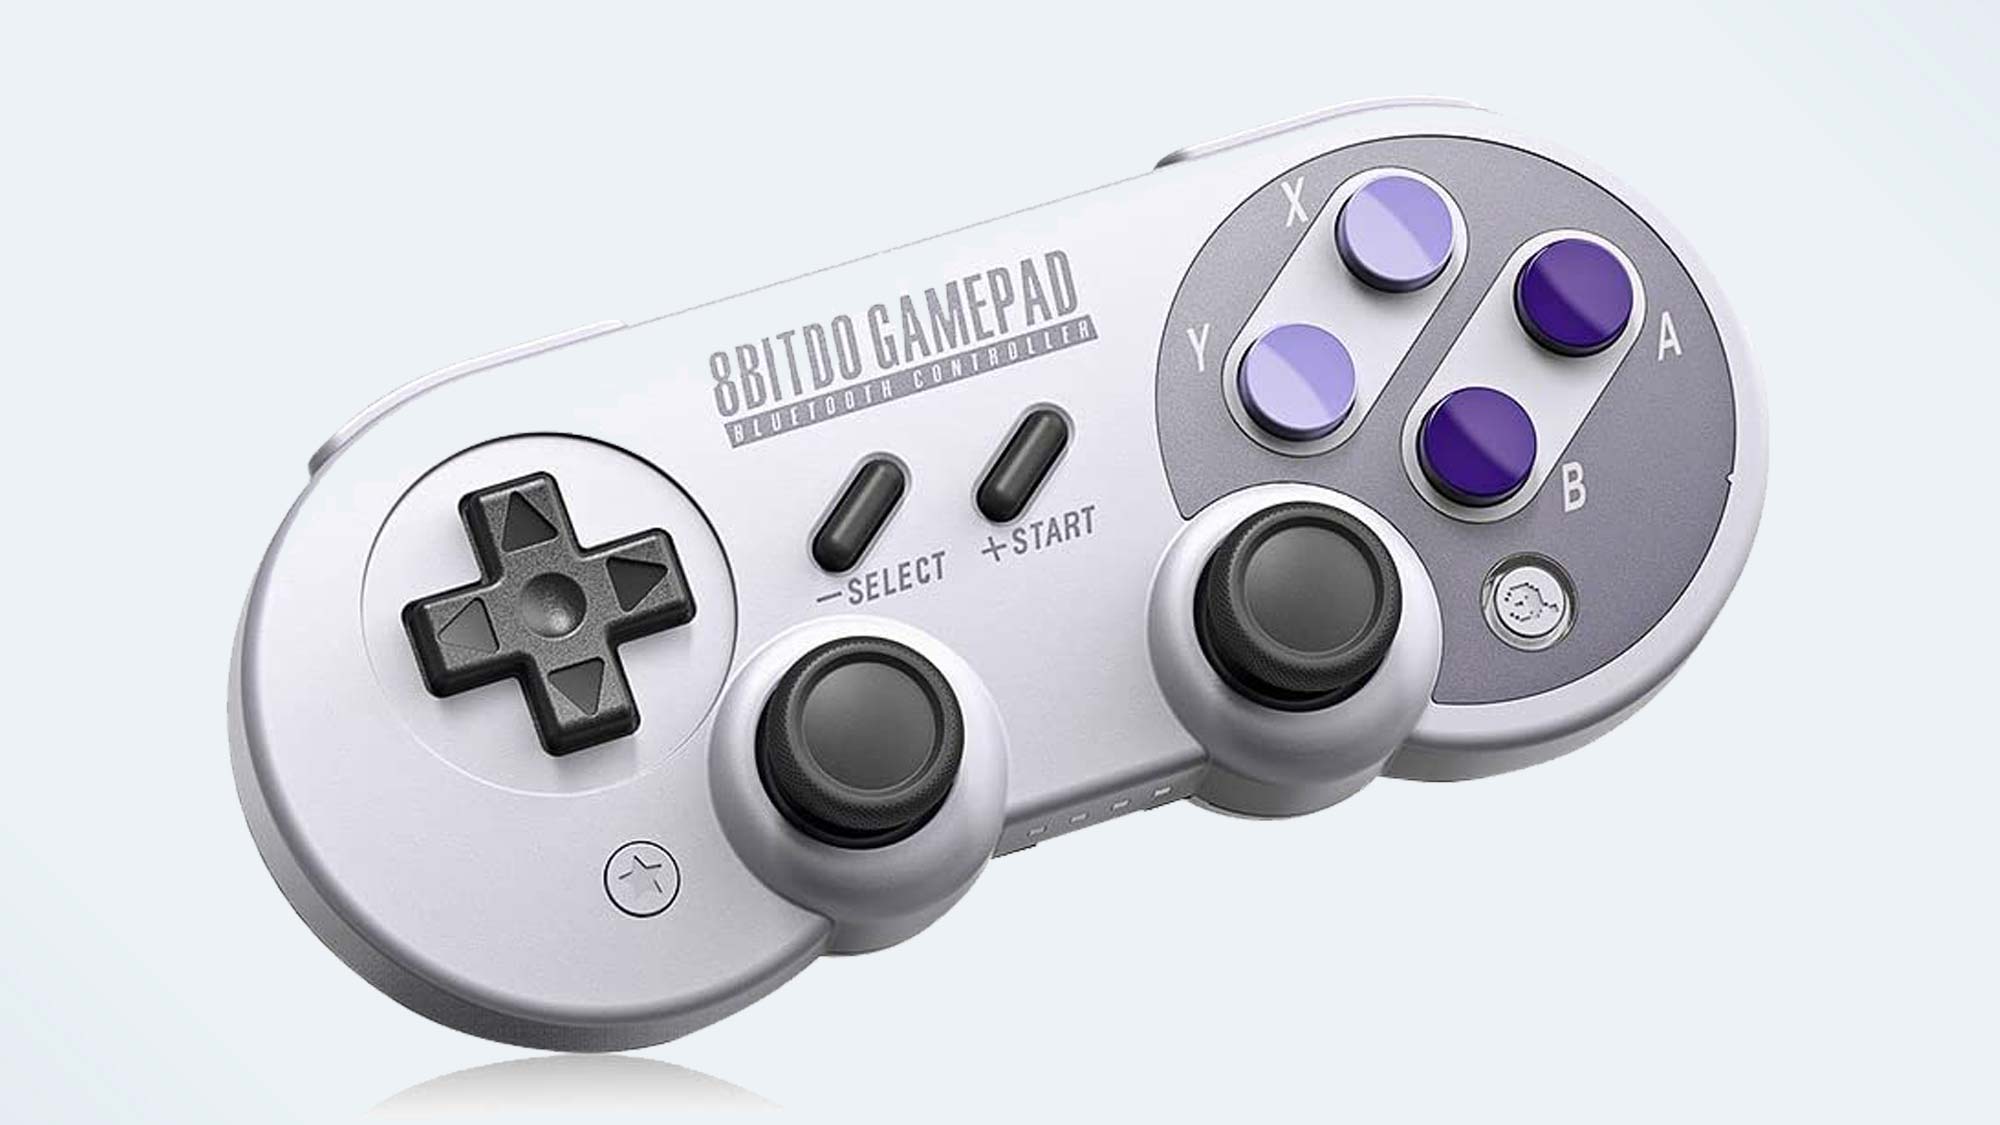 The best PC controllers in 2022